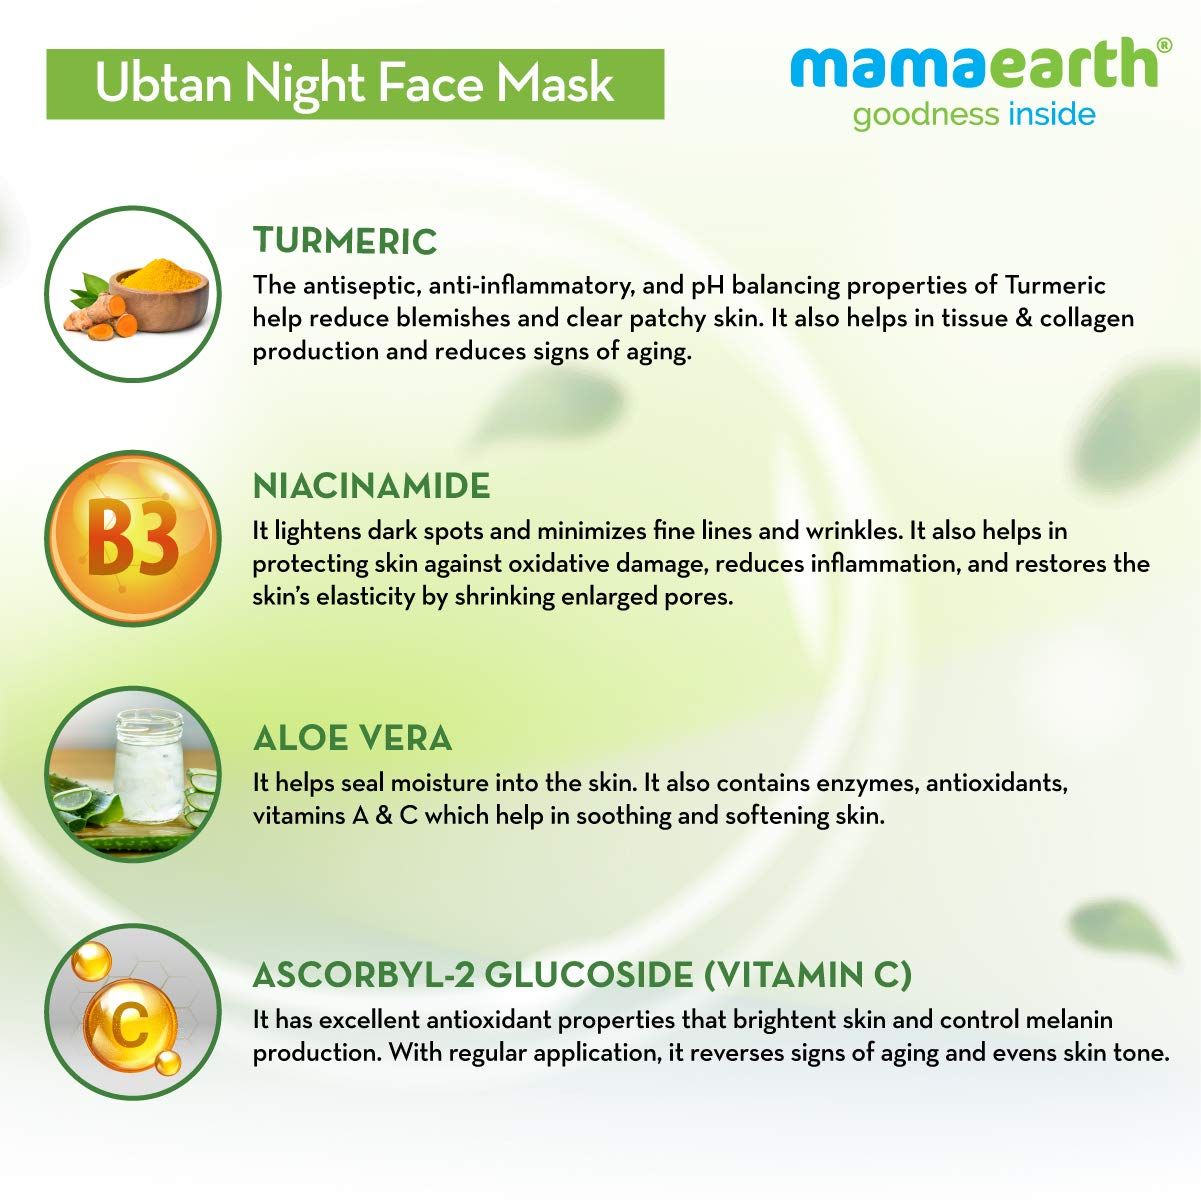 Ubtan Night Face Mask with Turmeric and Niacinamide for Glowing Skin - 100 g